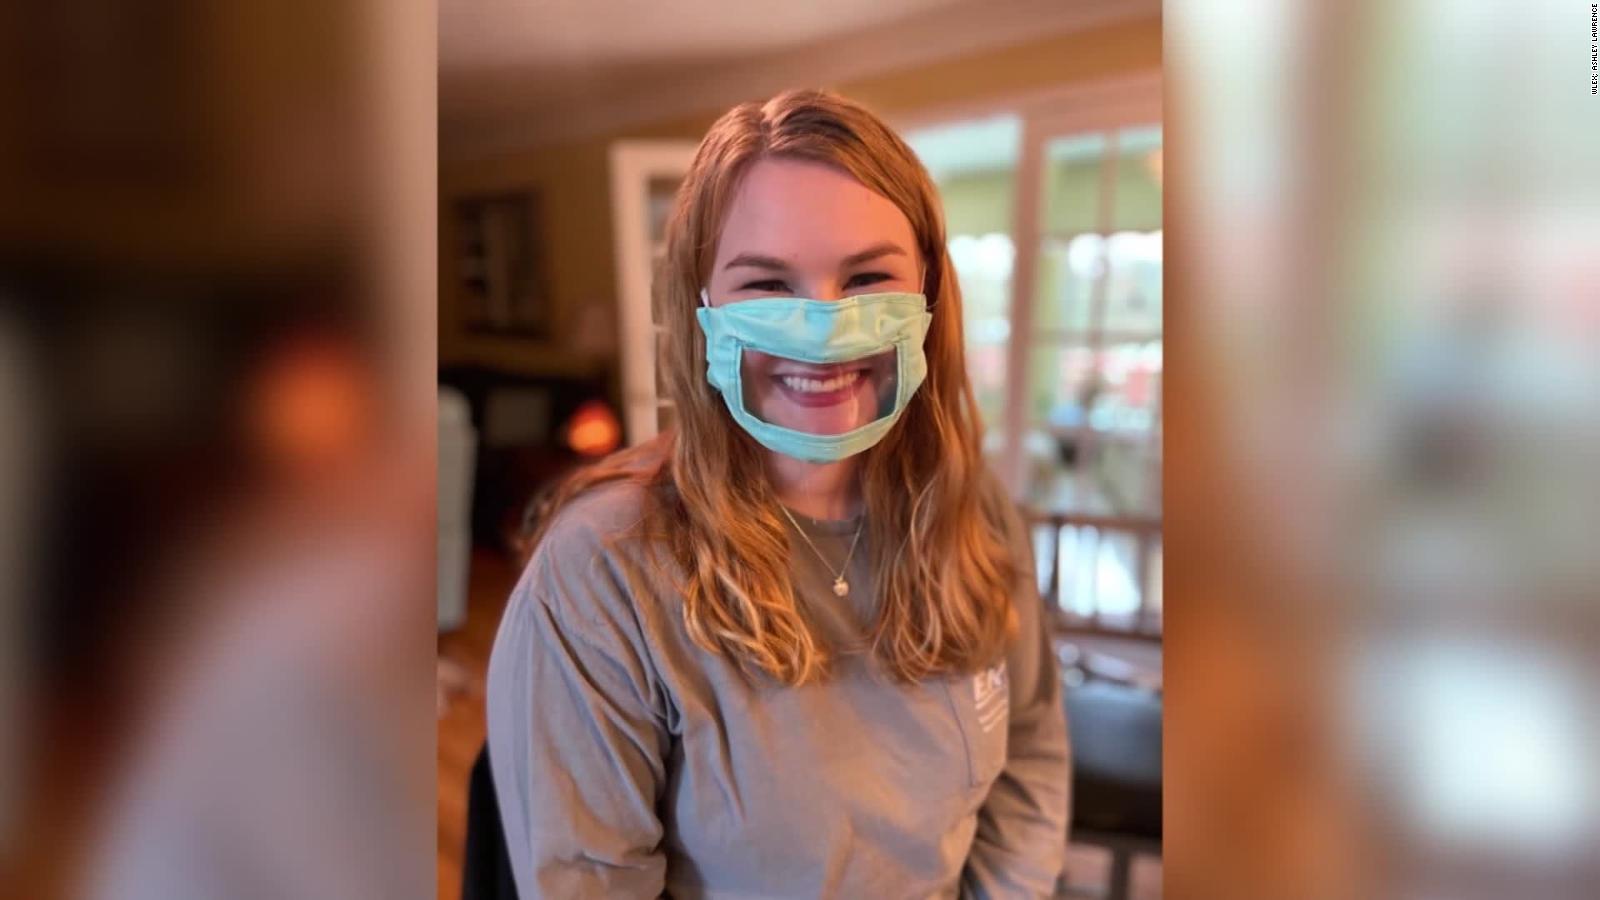 College Student Makes Face Masks With Plastic Window For Deaf And